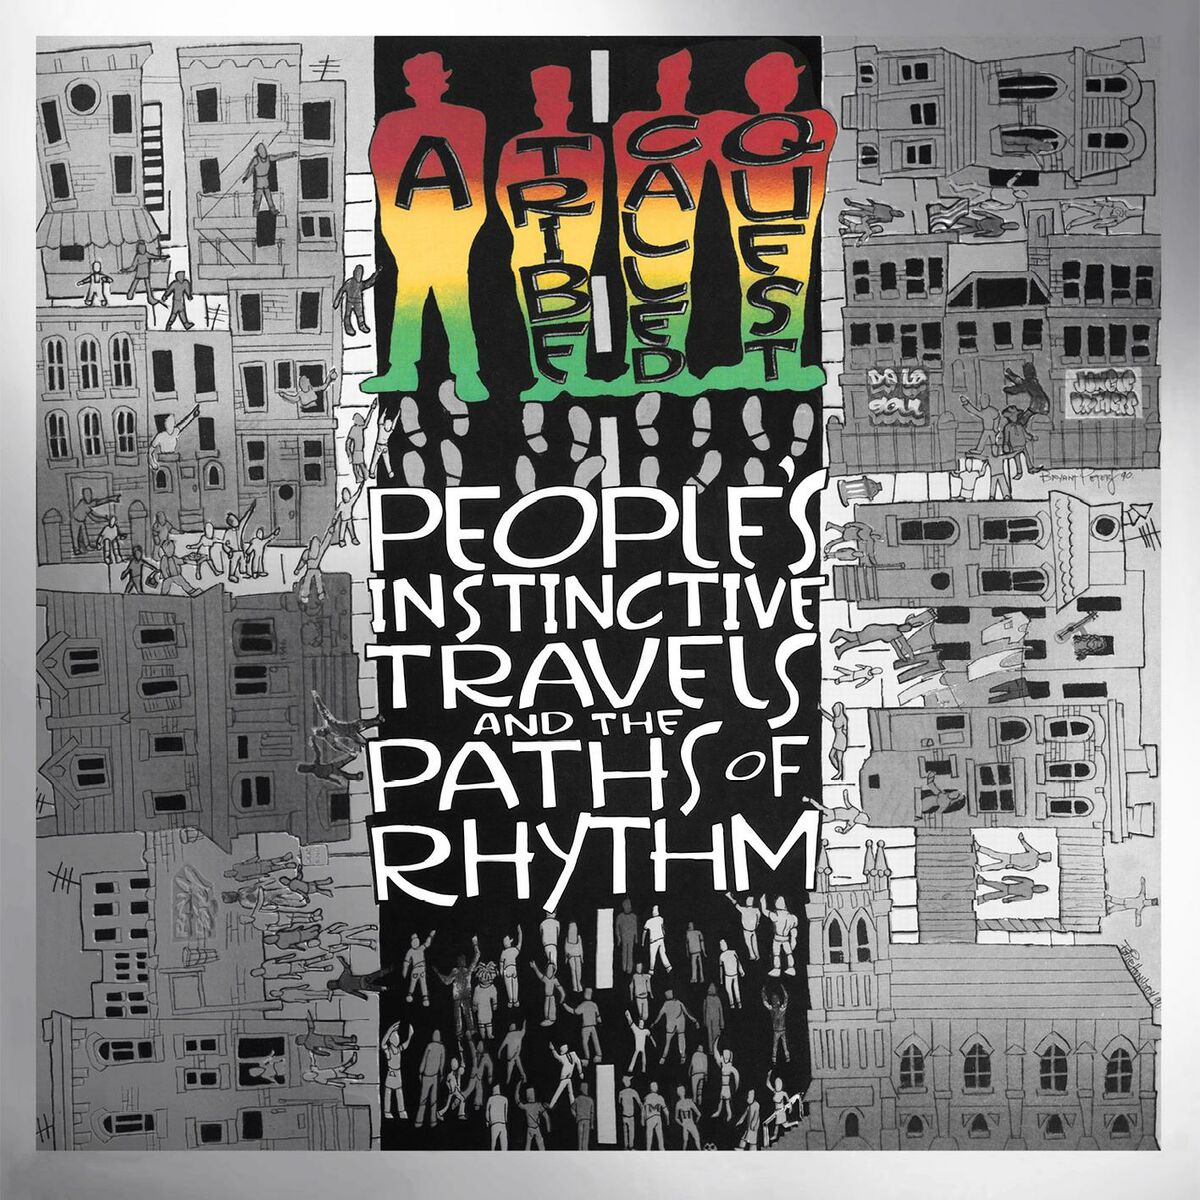 A Tribe Called Quest: albums, songs, playlists | Listen on Deezer